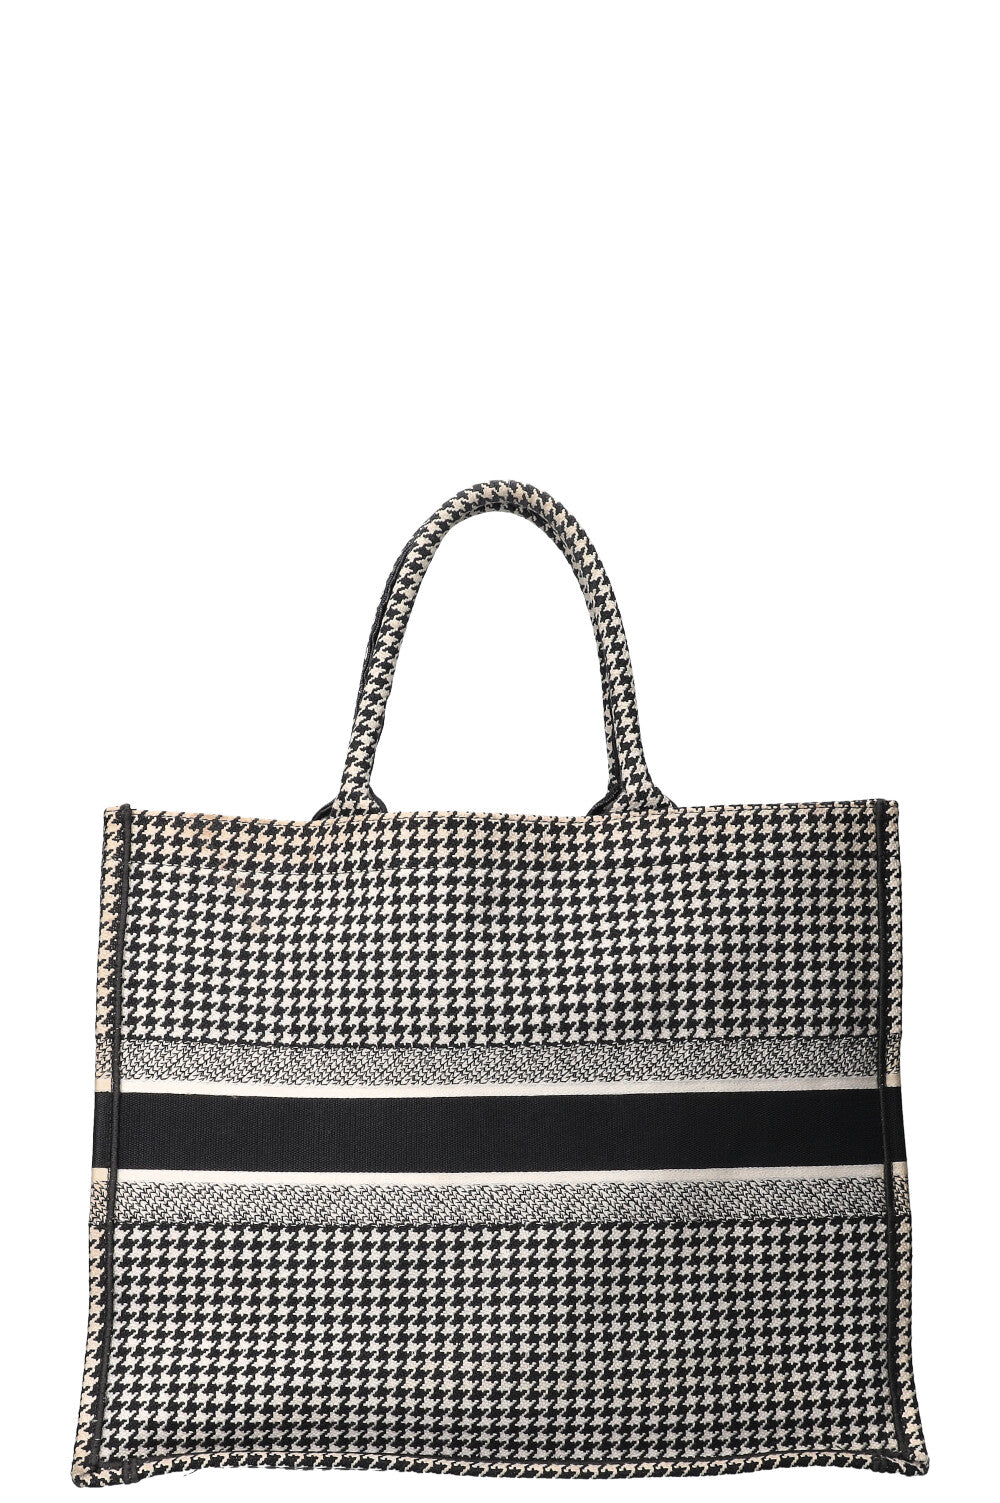 CHRISTIAN DIOR Houndstooth Book Tote Black & White